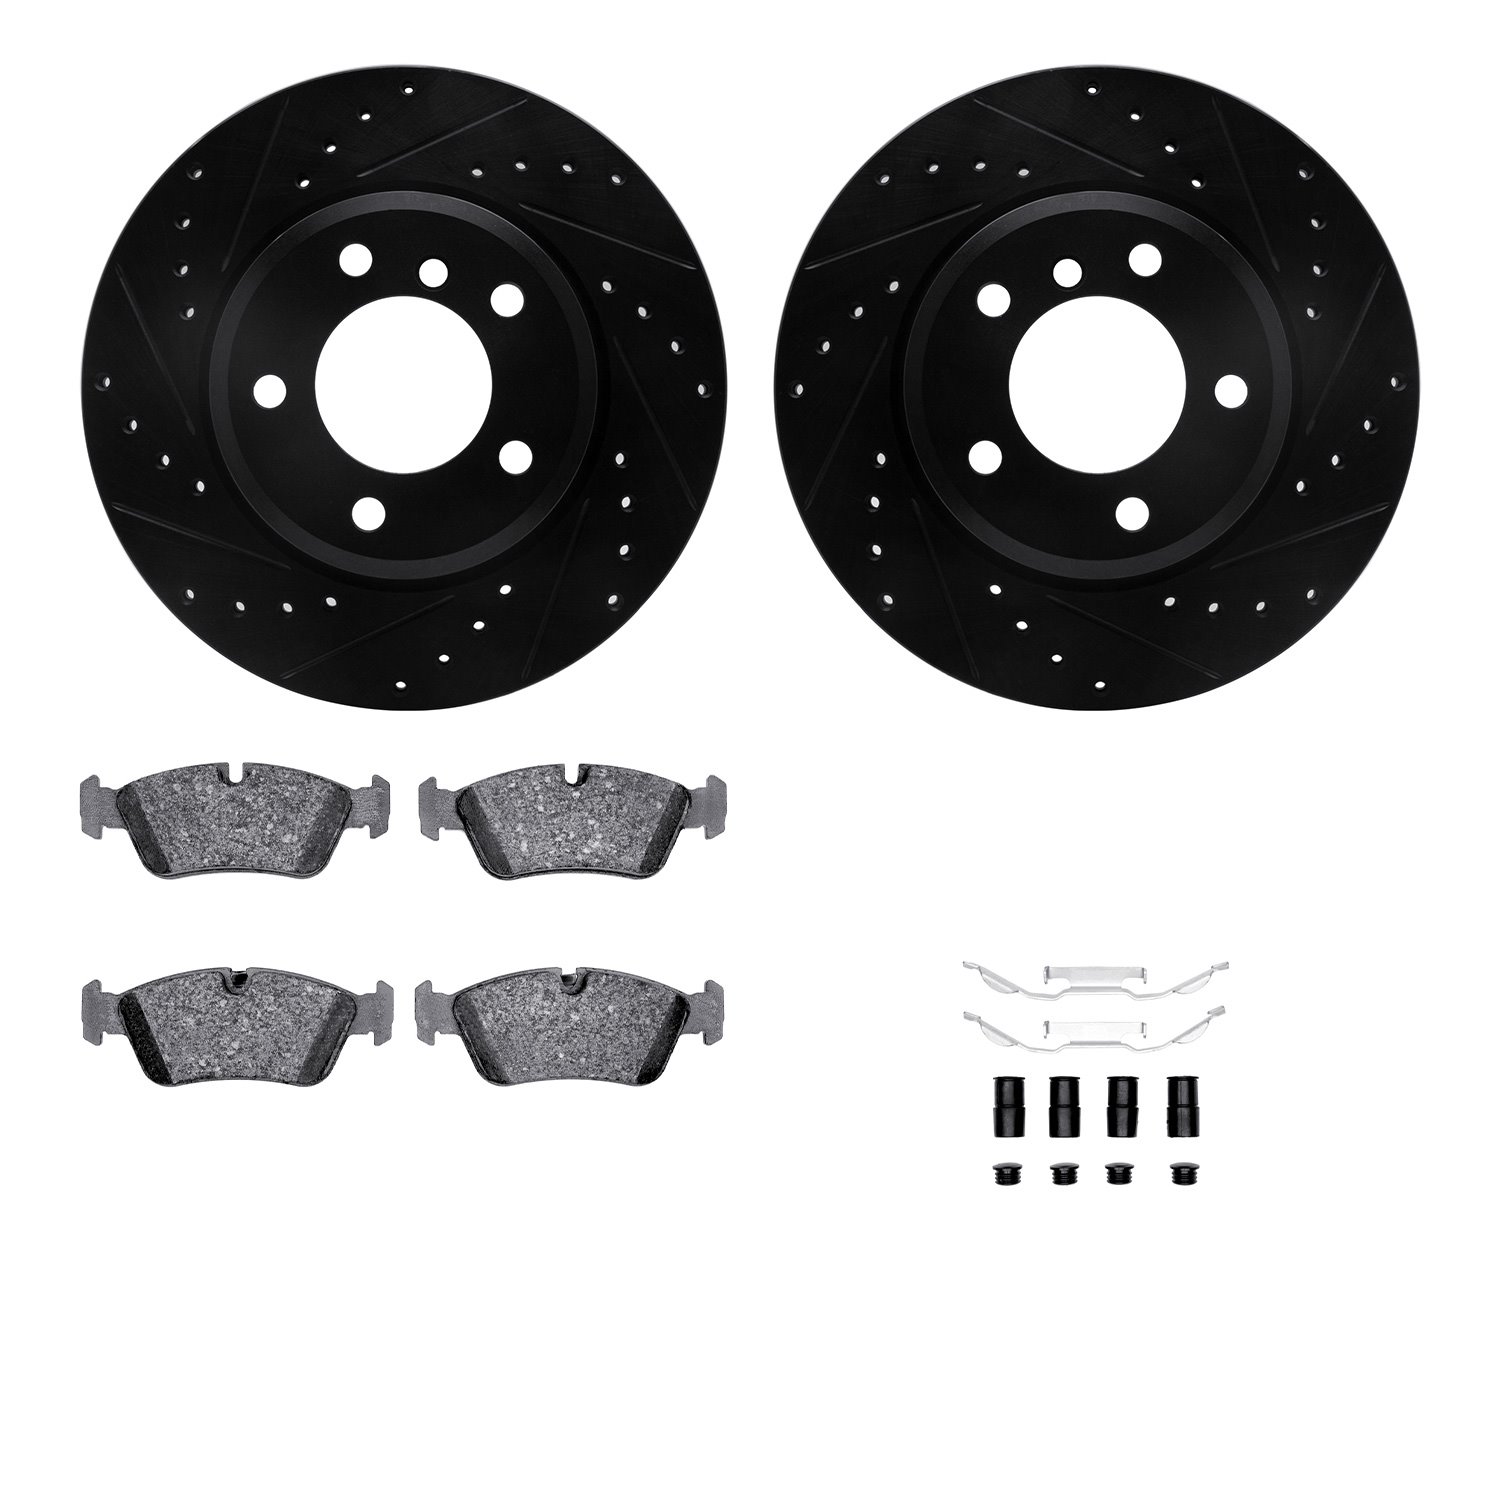 8312-31039 Drilled/Slotted Brake Rotors with 3000-Series Ceramic Brake Pads Kit & Hardware [Black], 1999-2008 BMW, Position: Fro